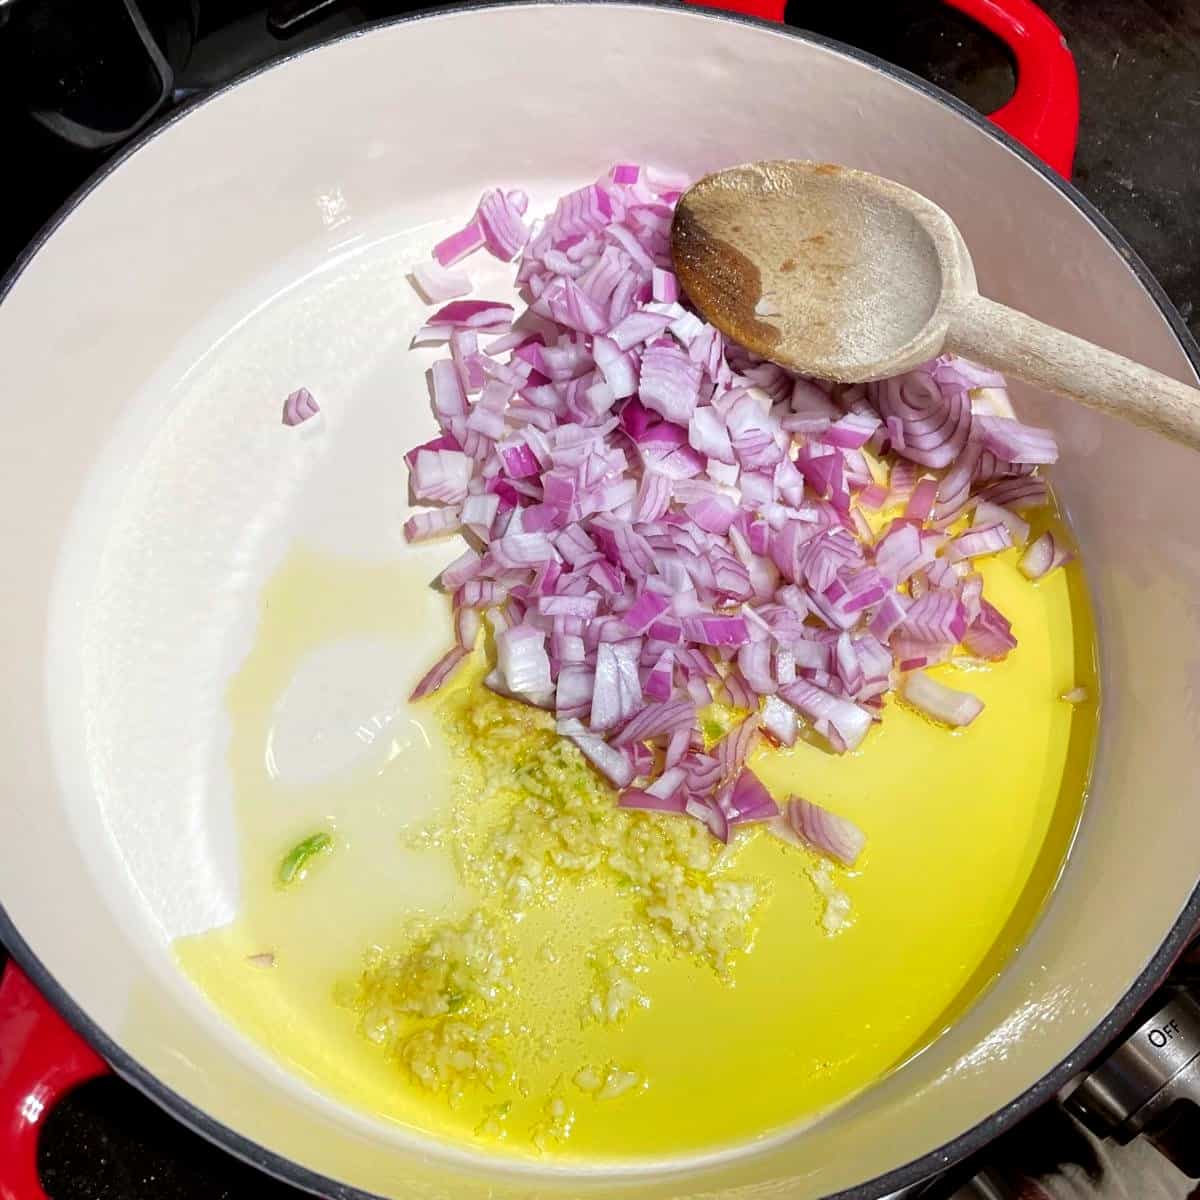 Onions and garlic added to olive oil in skillet.